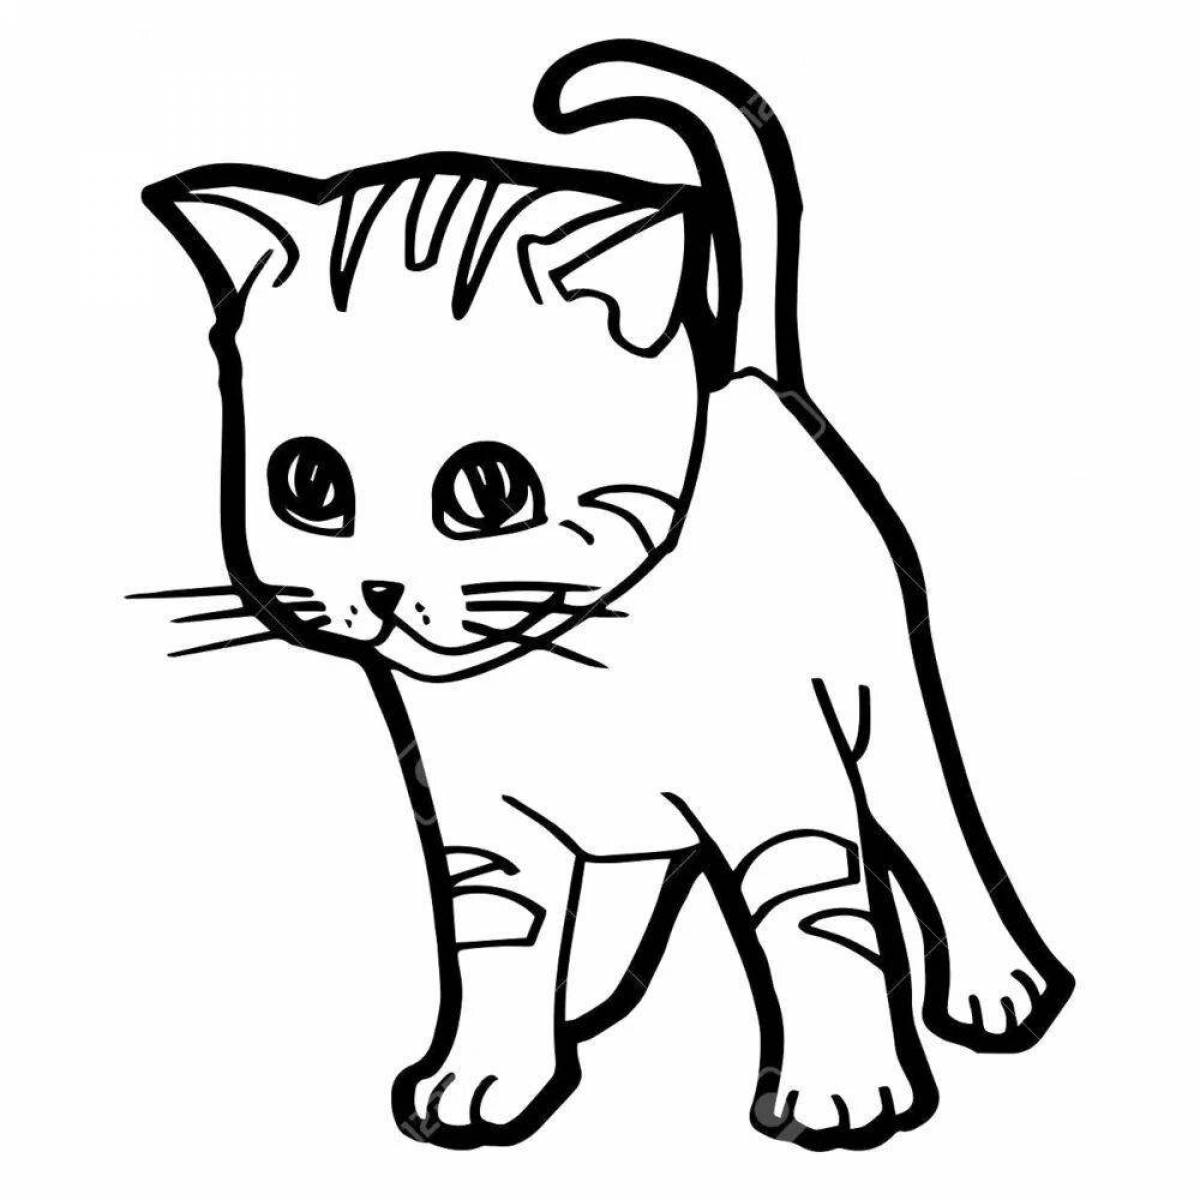 Coloring page sweet whiskas cat